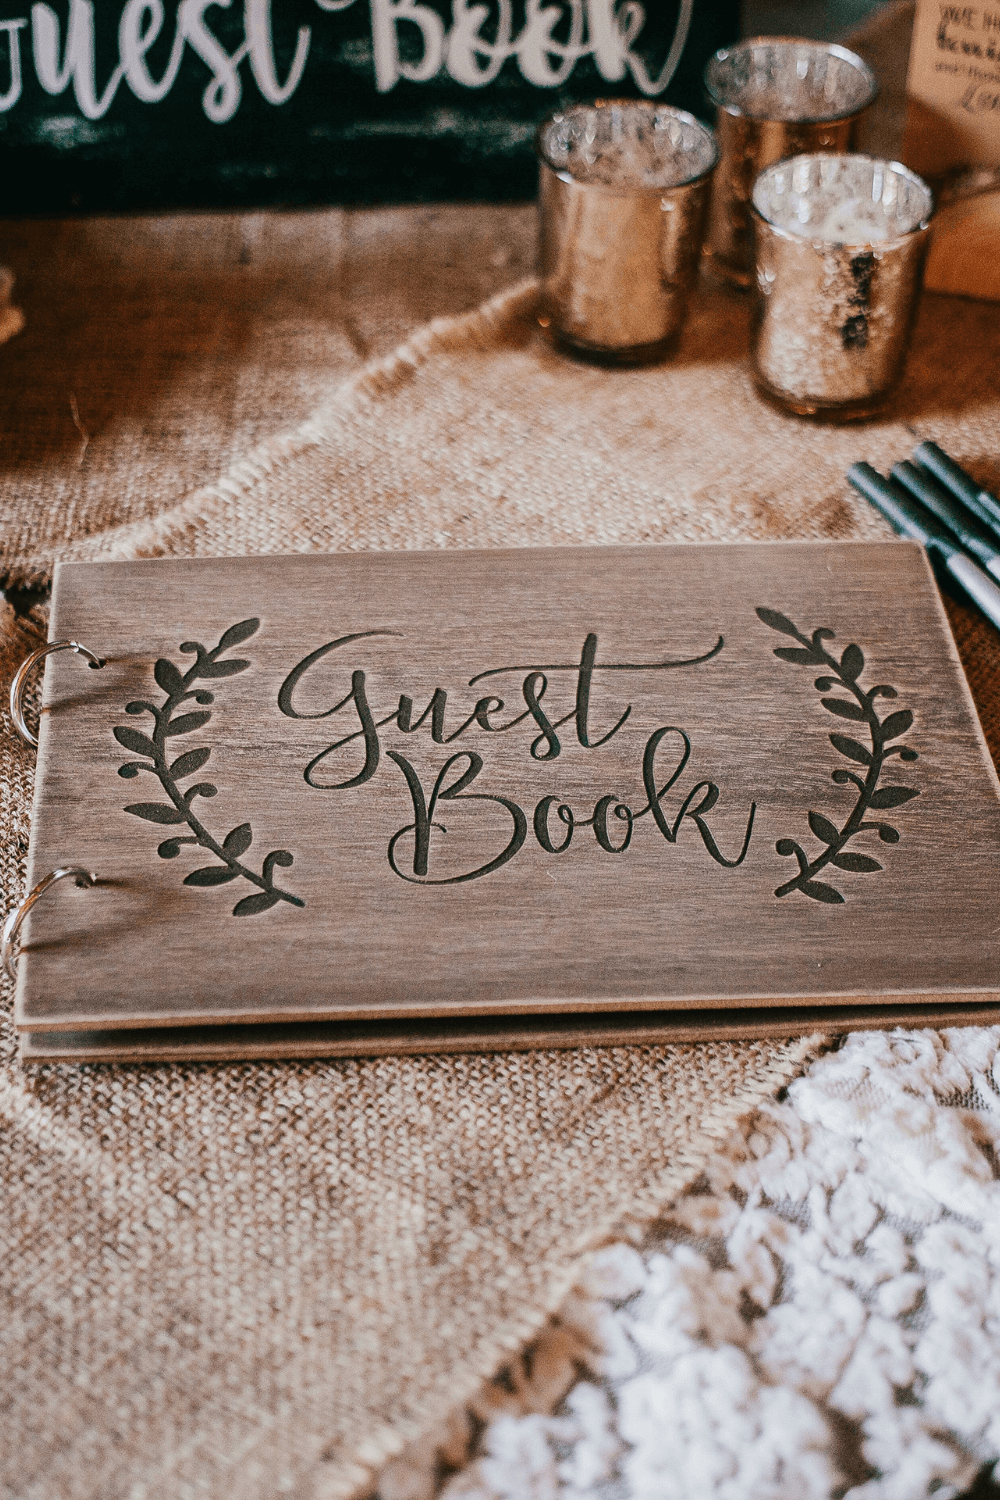 The Best Pens for Signing Guestbooks - Be My Guest Design